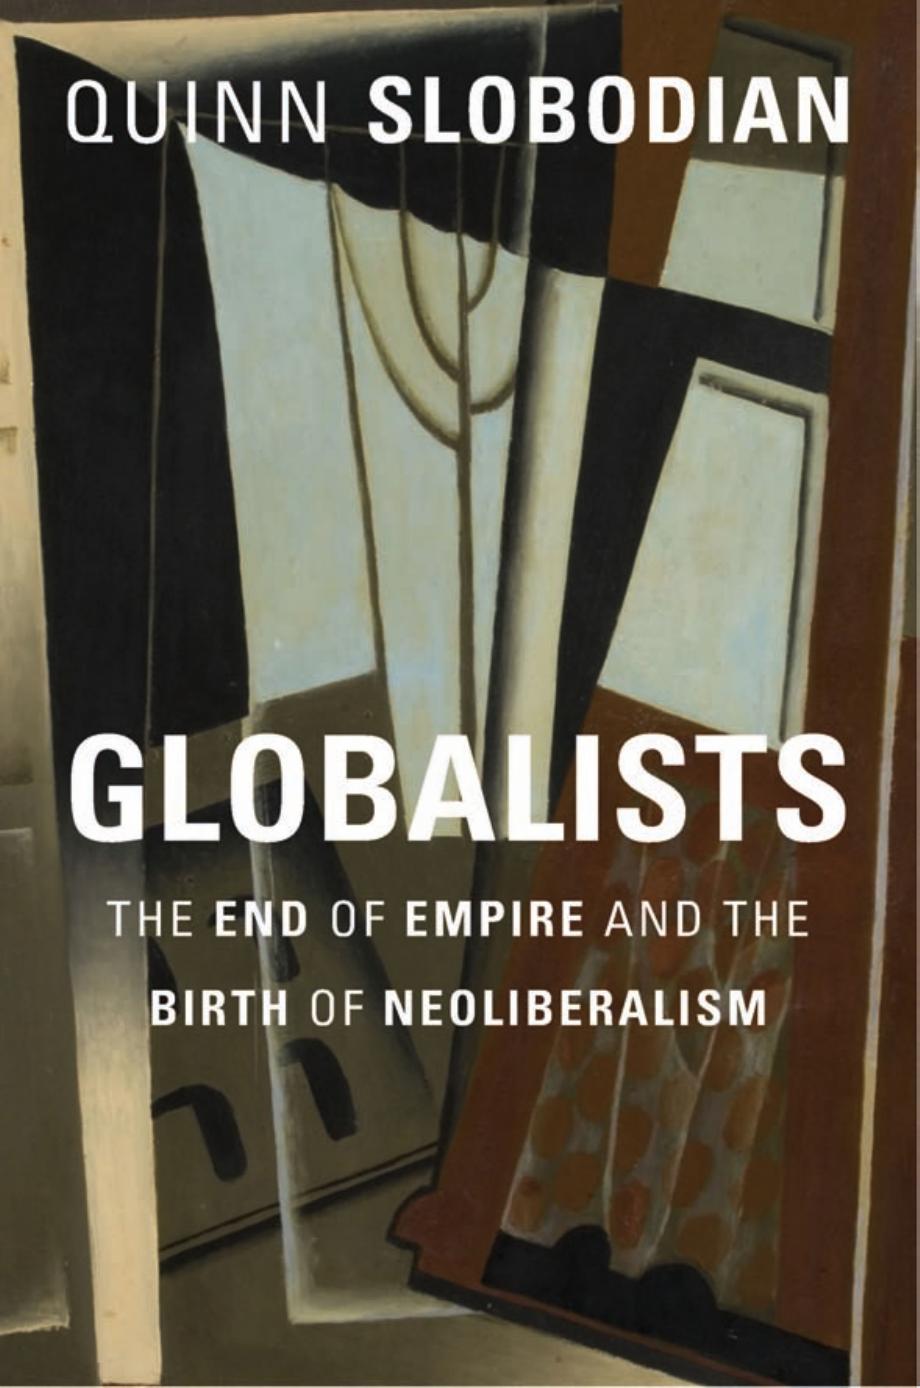 Globalists by Quinn Slobodian